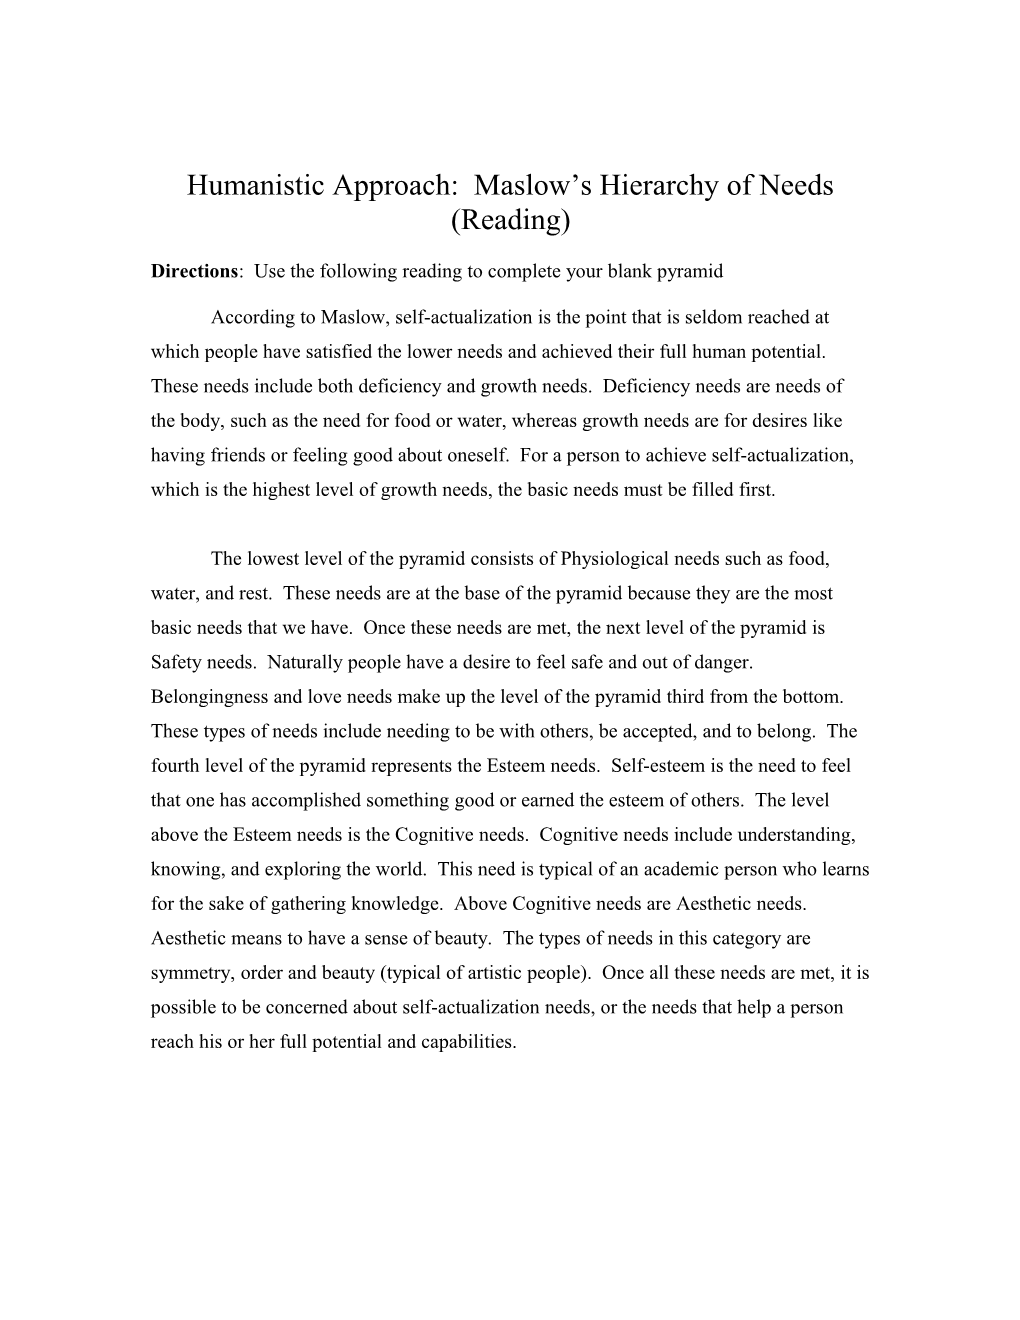 Humanistic Approach: Maslow S Hierarchy of Needs (Reading)